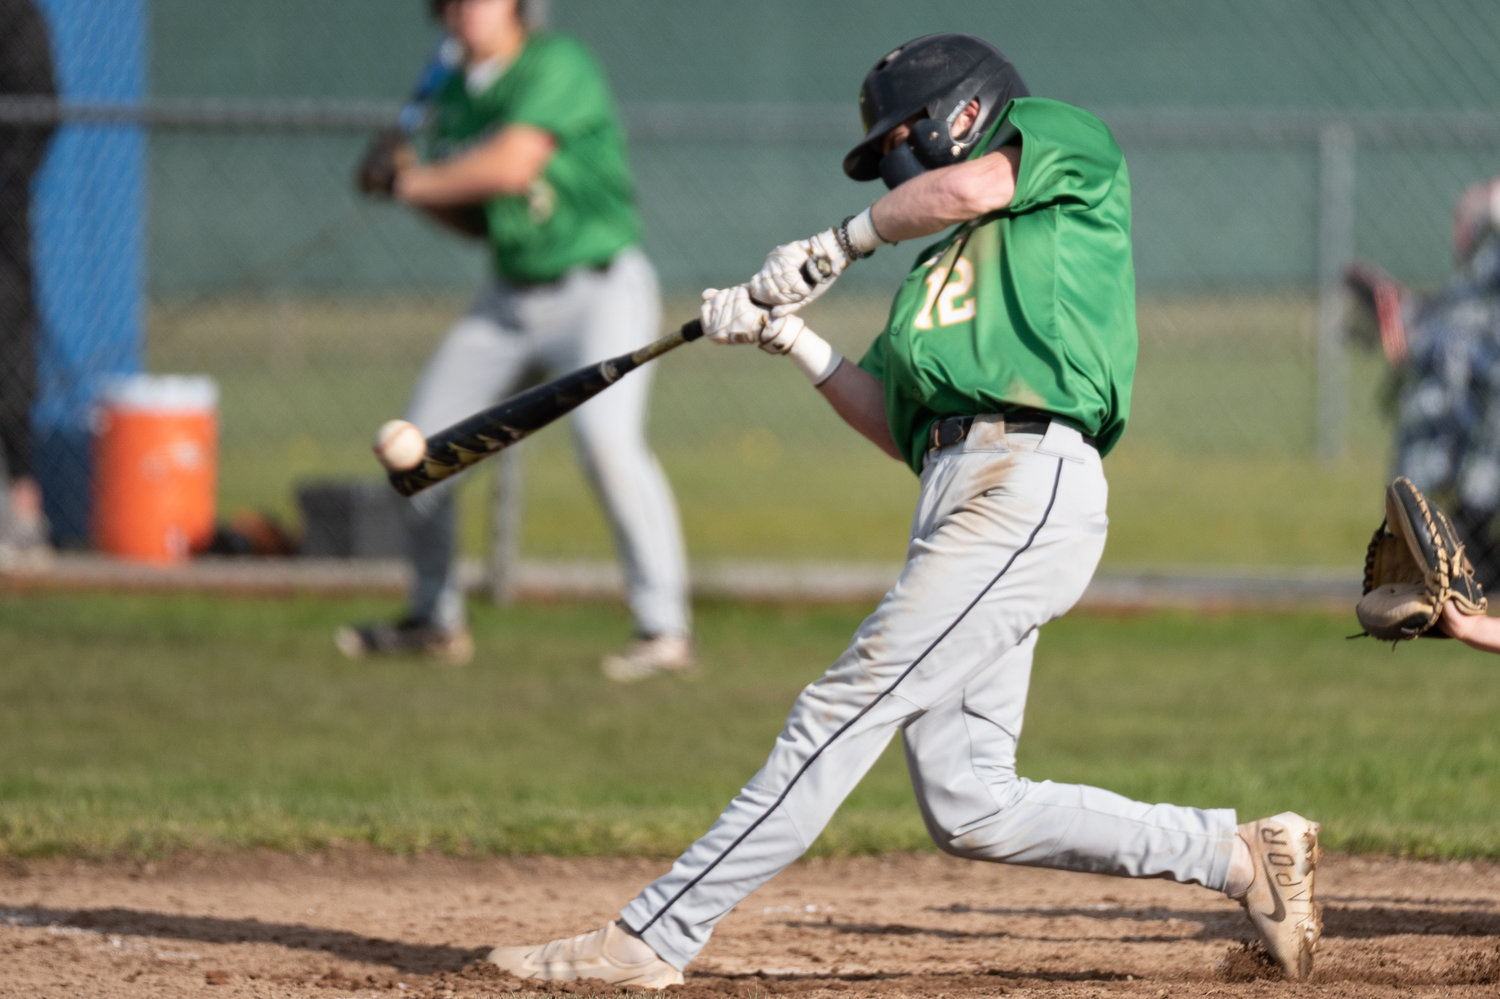 Tumwater's Brayden Oram makes contact with a pitch against Rochester April 27.